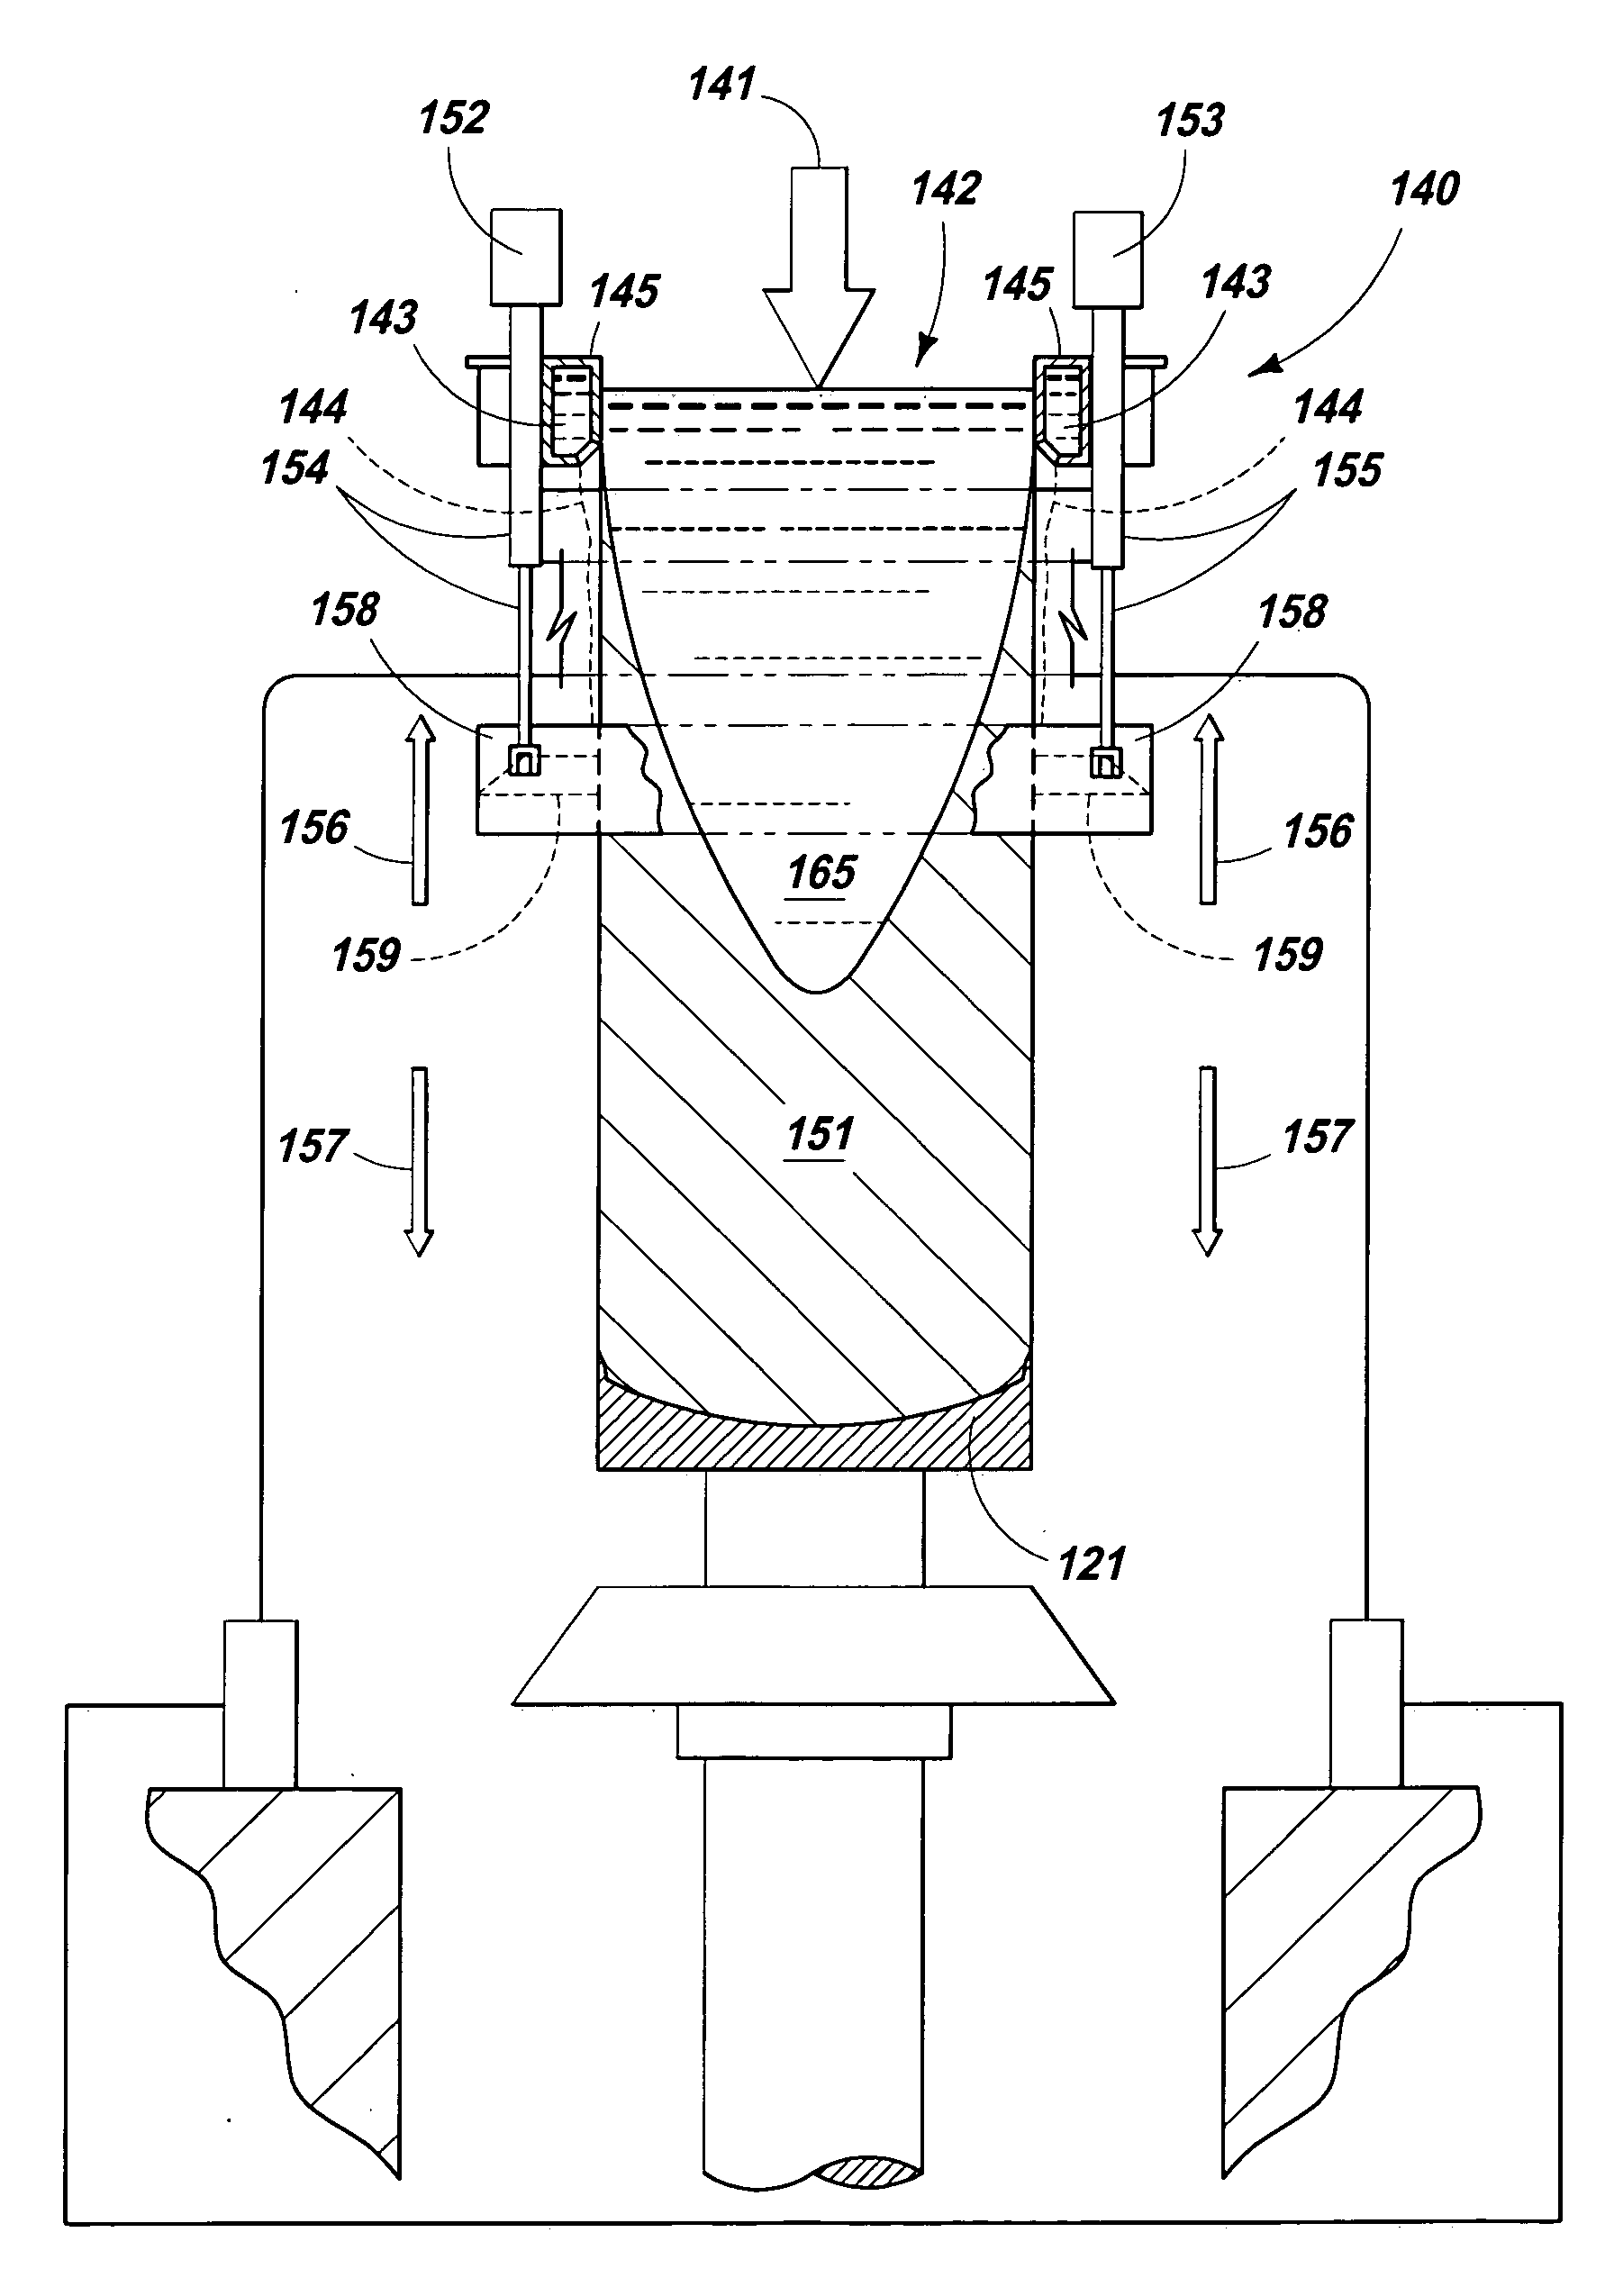 Coolant control and wiper system for a continuous casting molten metal mold